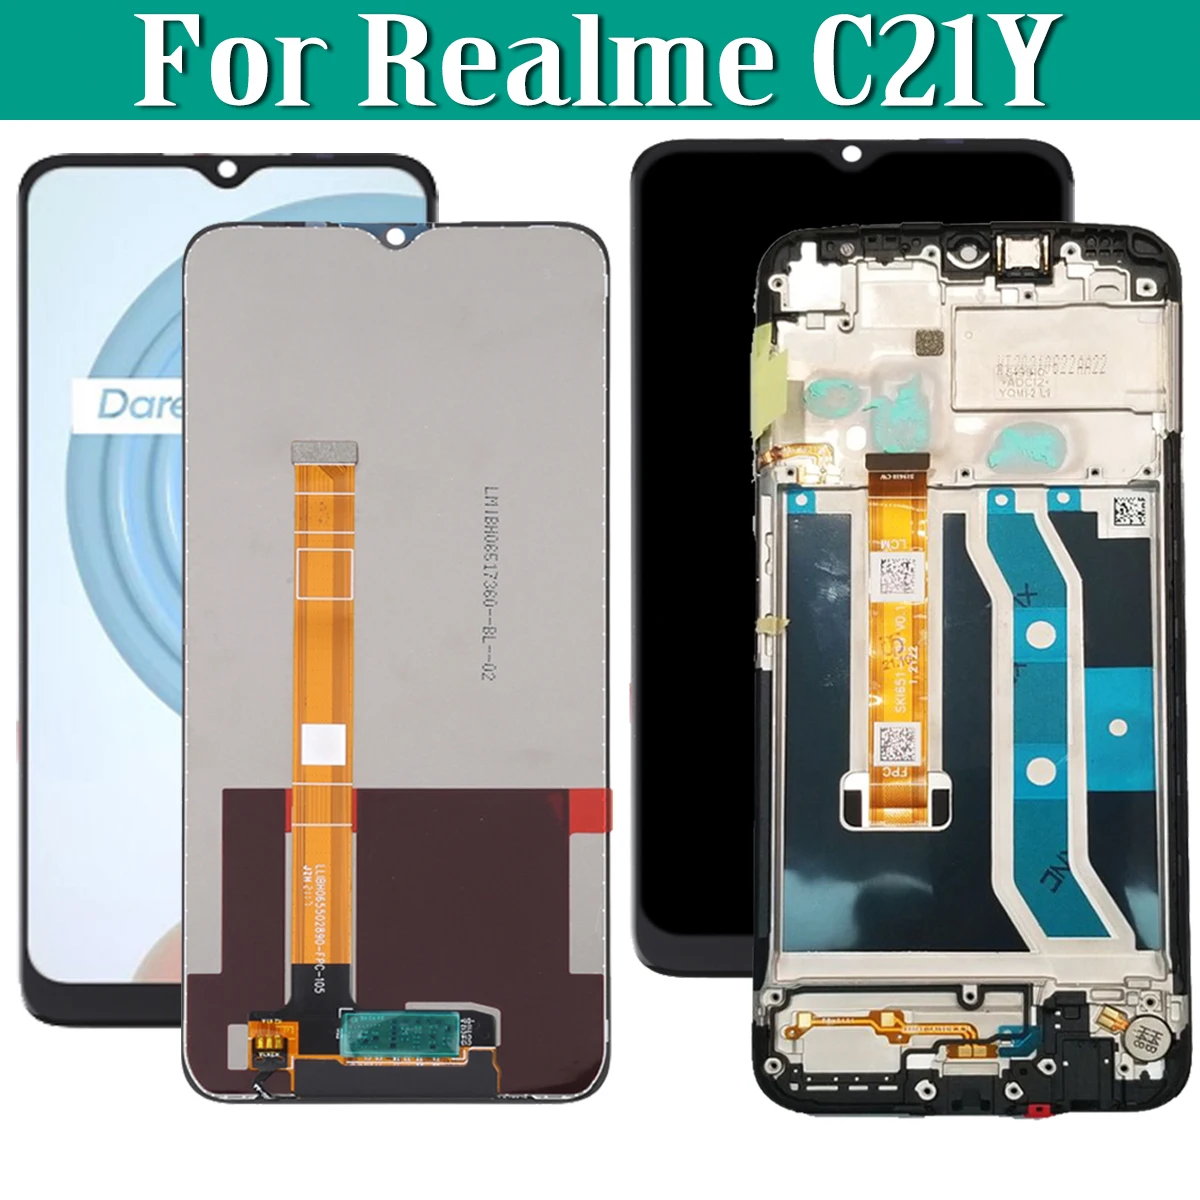 

Original For Realme C25Y RMX3265 RMX3268 RMX3269 LCD Display Touch Screen Digitizer Assembly For Realme C21Y RMX3261 Screen